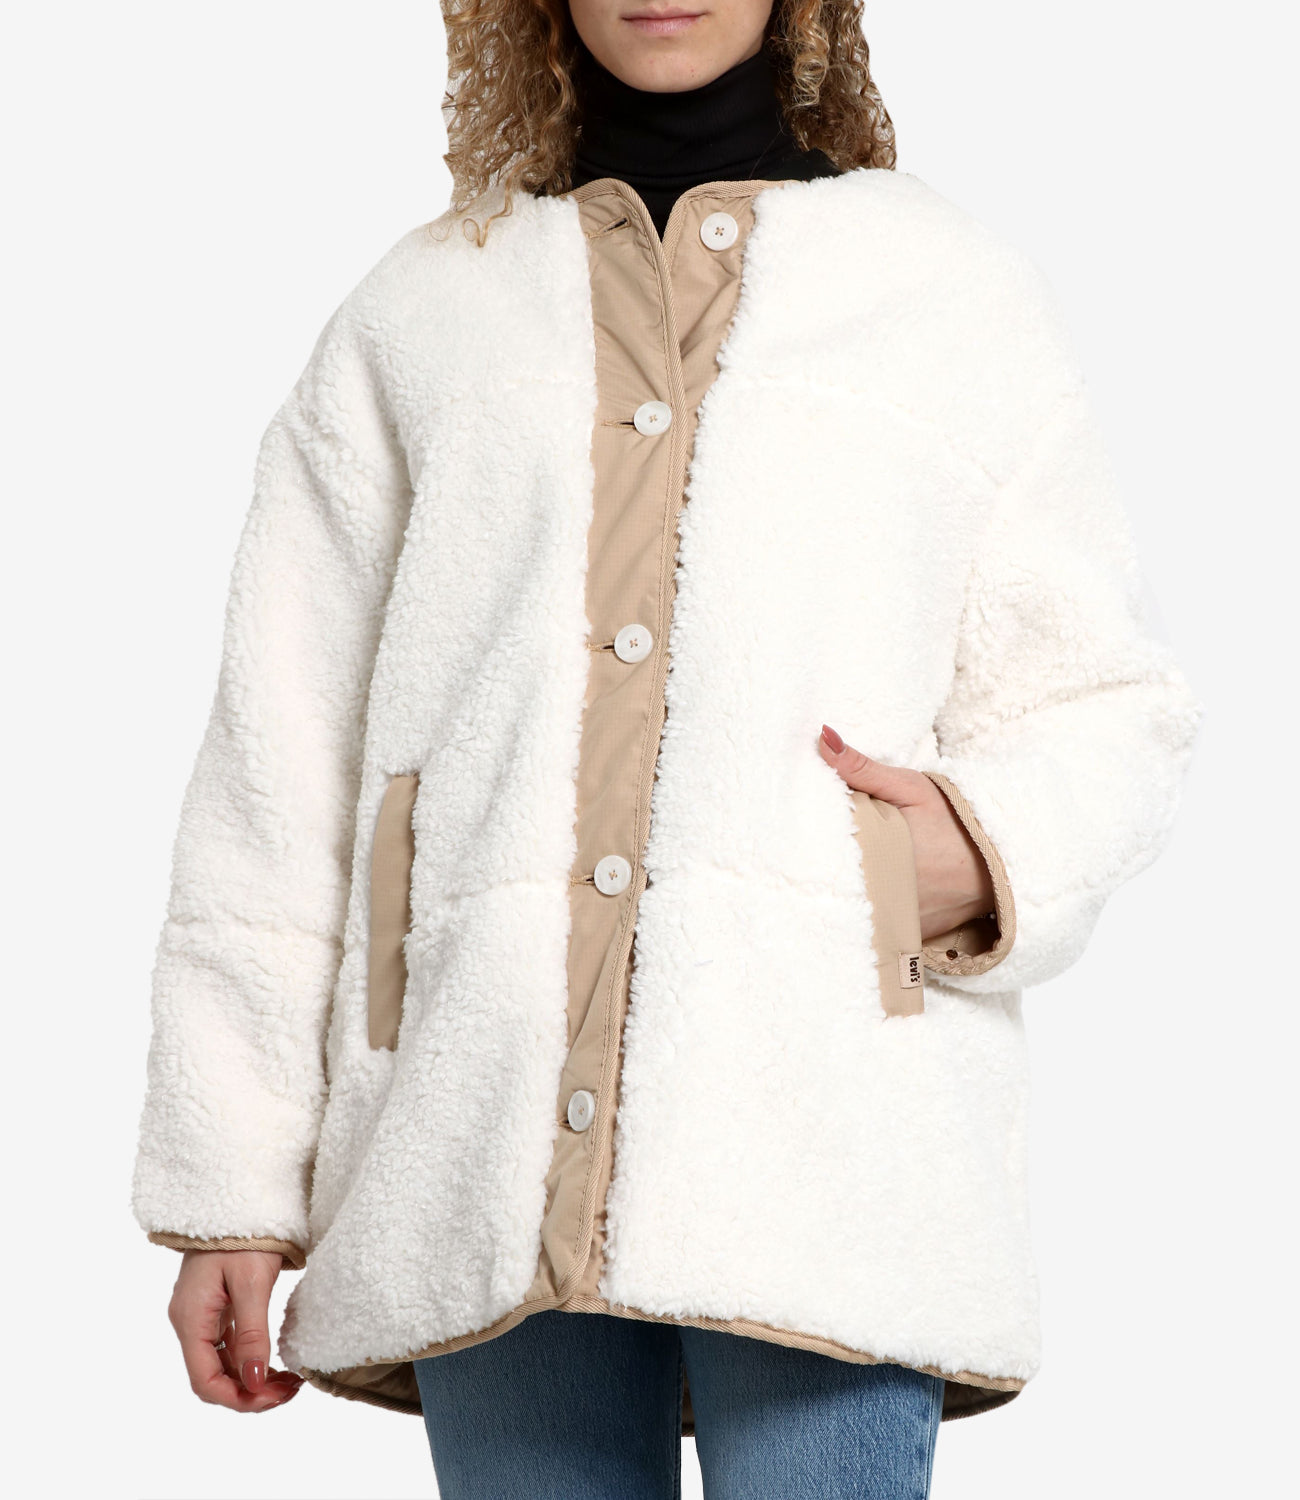 Levis | White and Beige Jacket